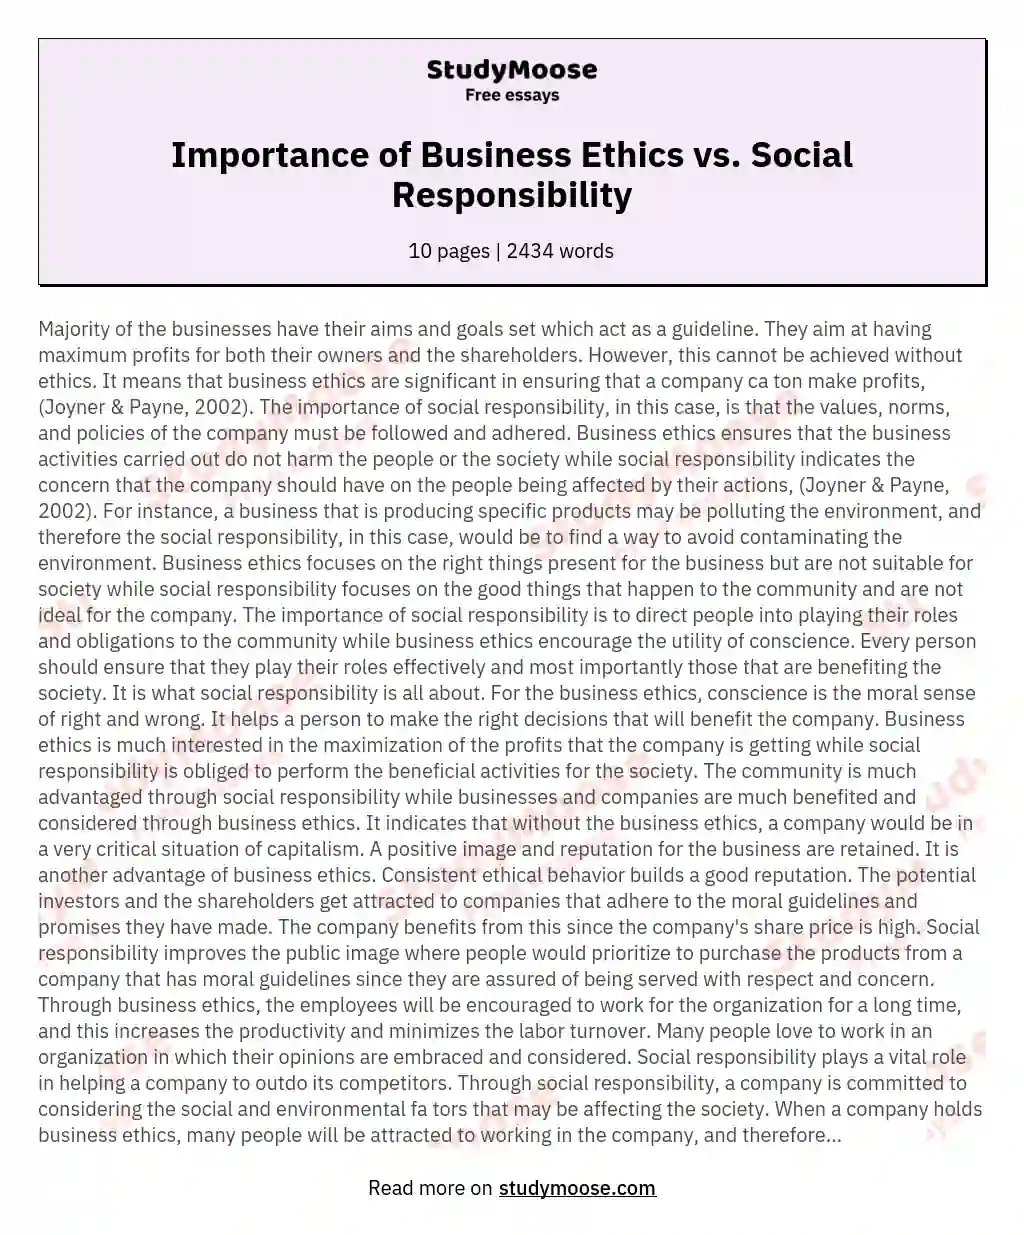 Importance of Business Ethics vs. Social Responsibility essay